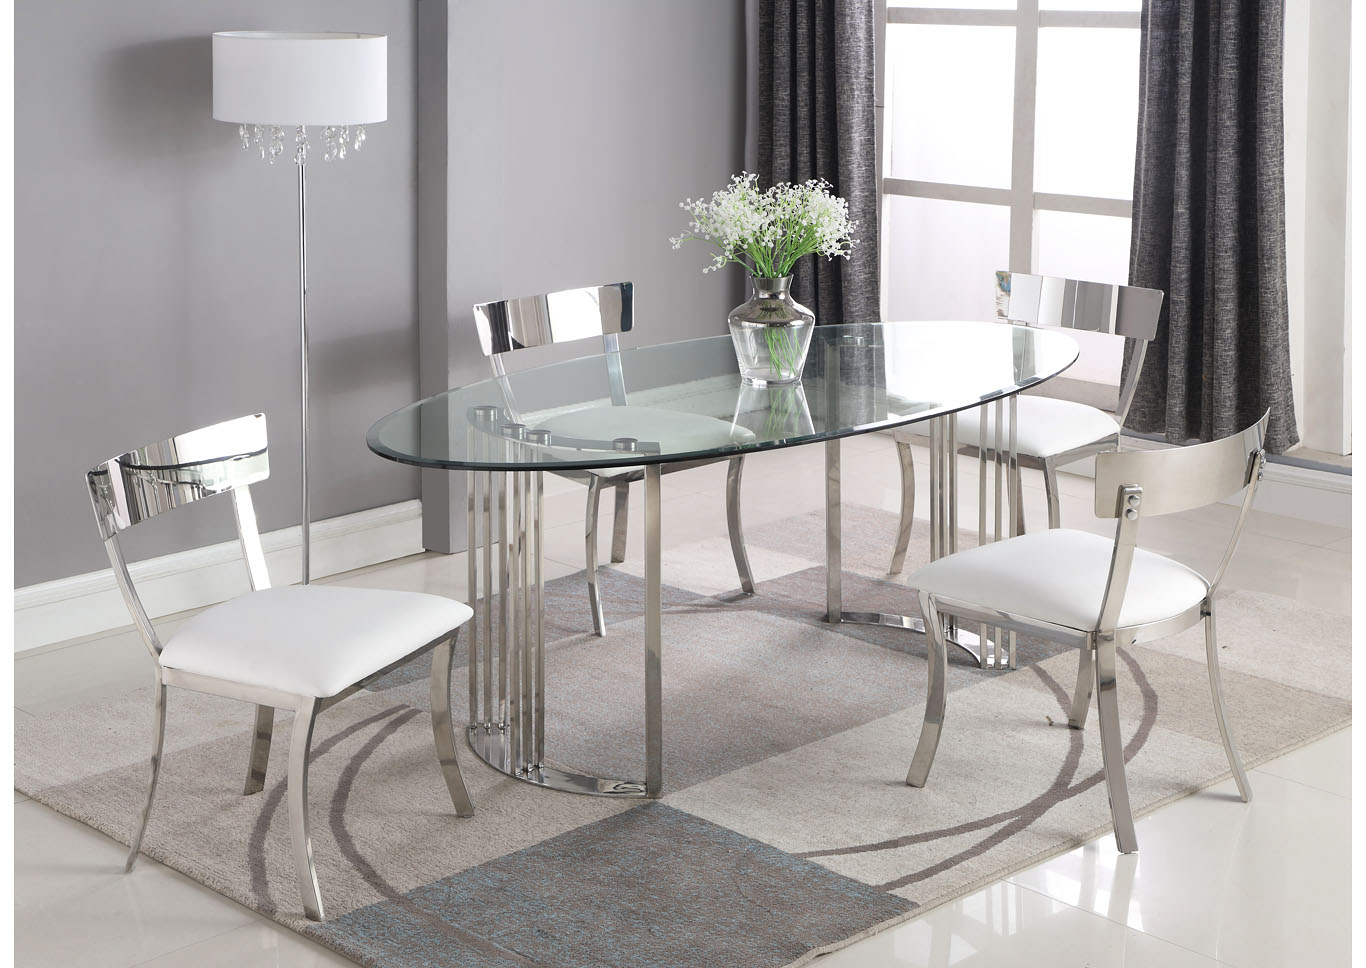 Maiden Clear Oval Glass Top Dining Table,Chintaly Imports